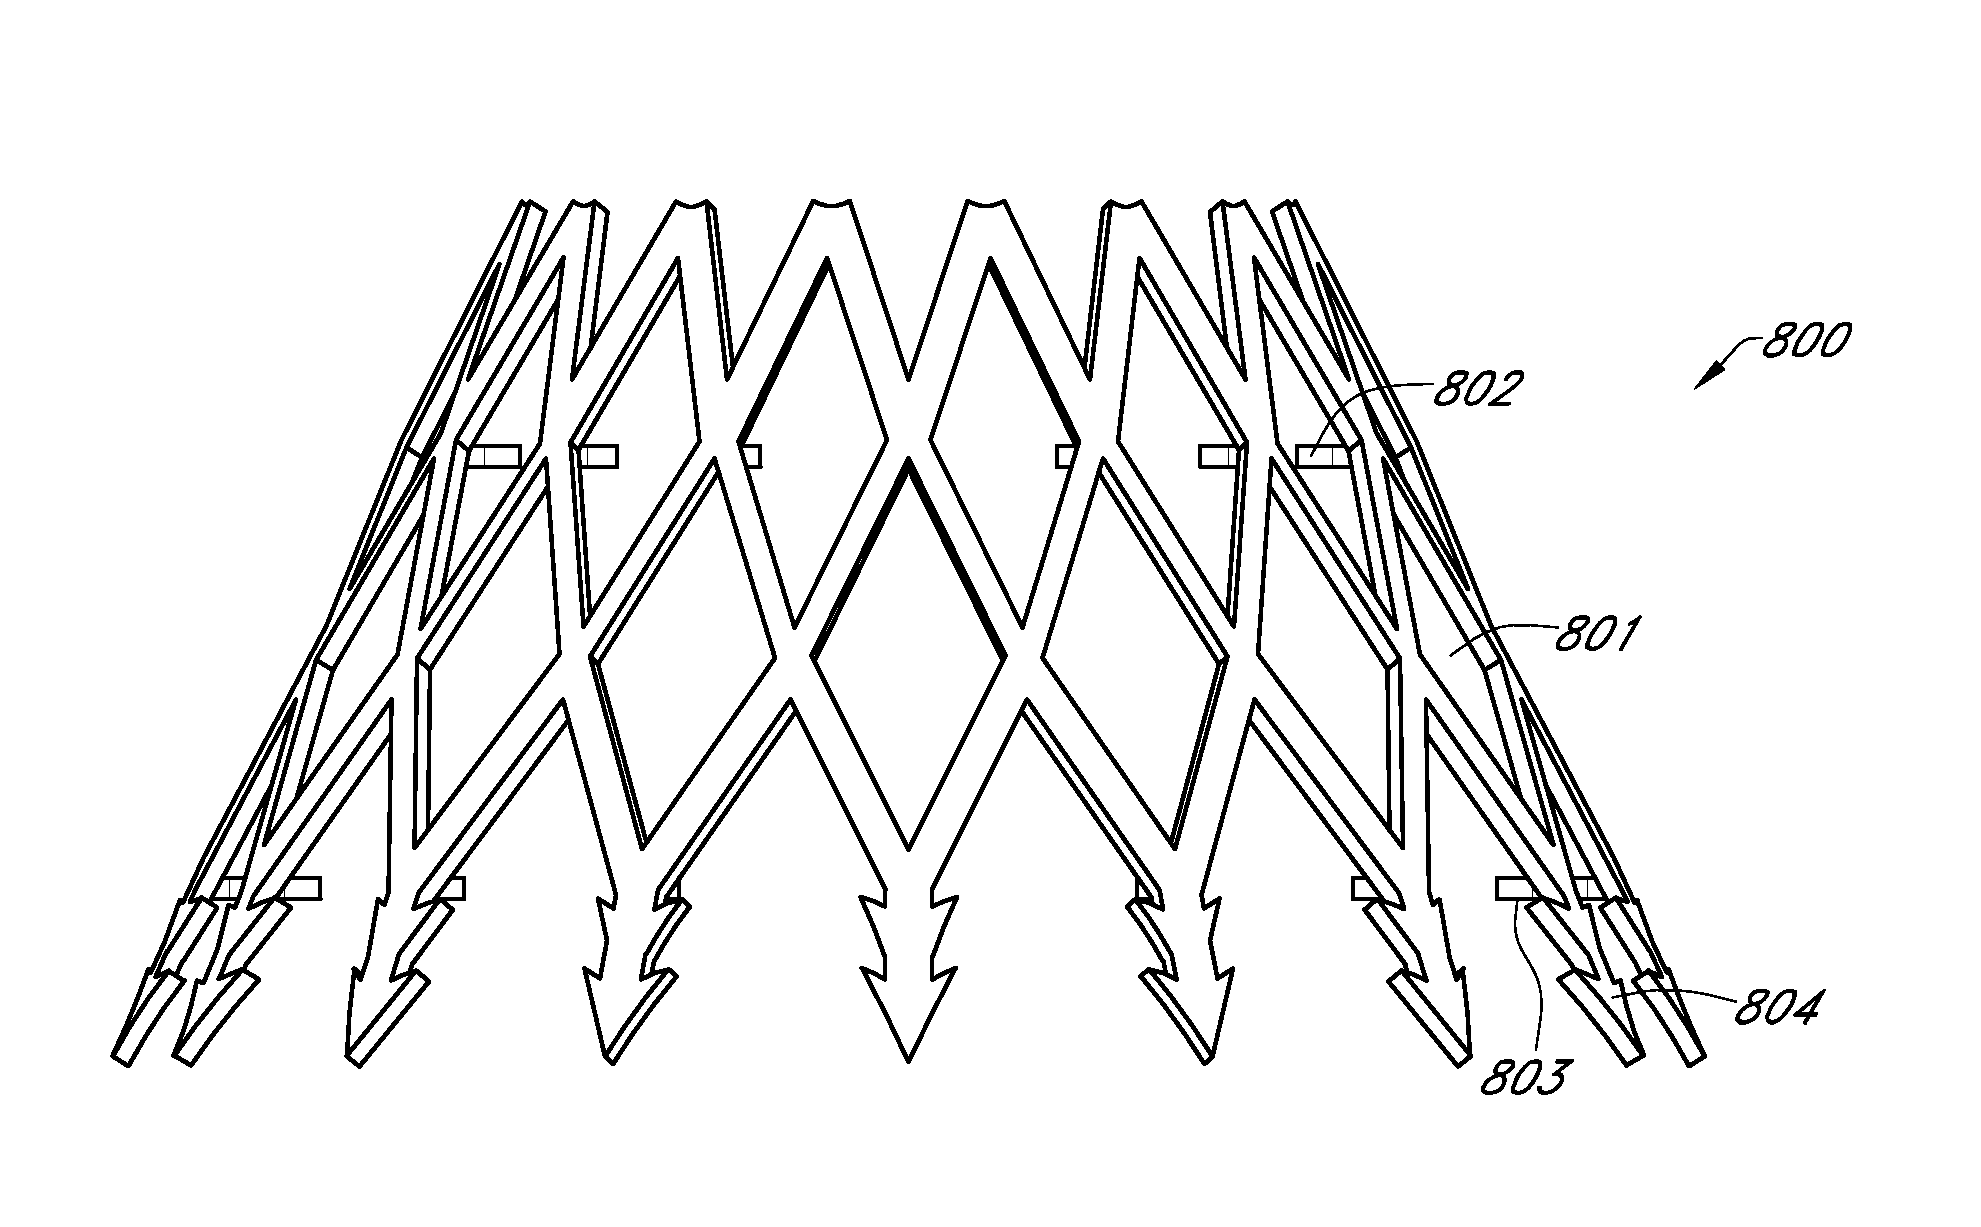 Adjustable endolumenal implant for reshaping the mitral valve annulus